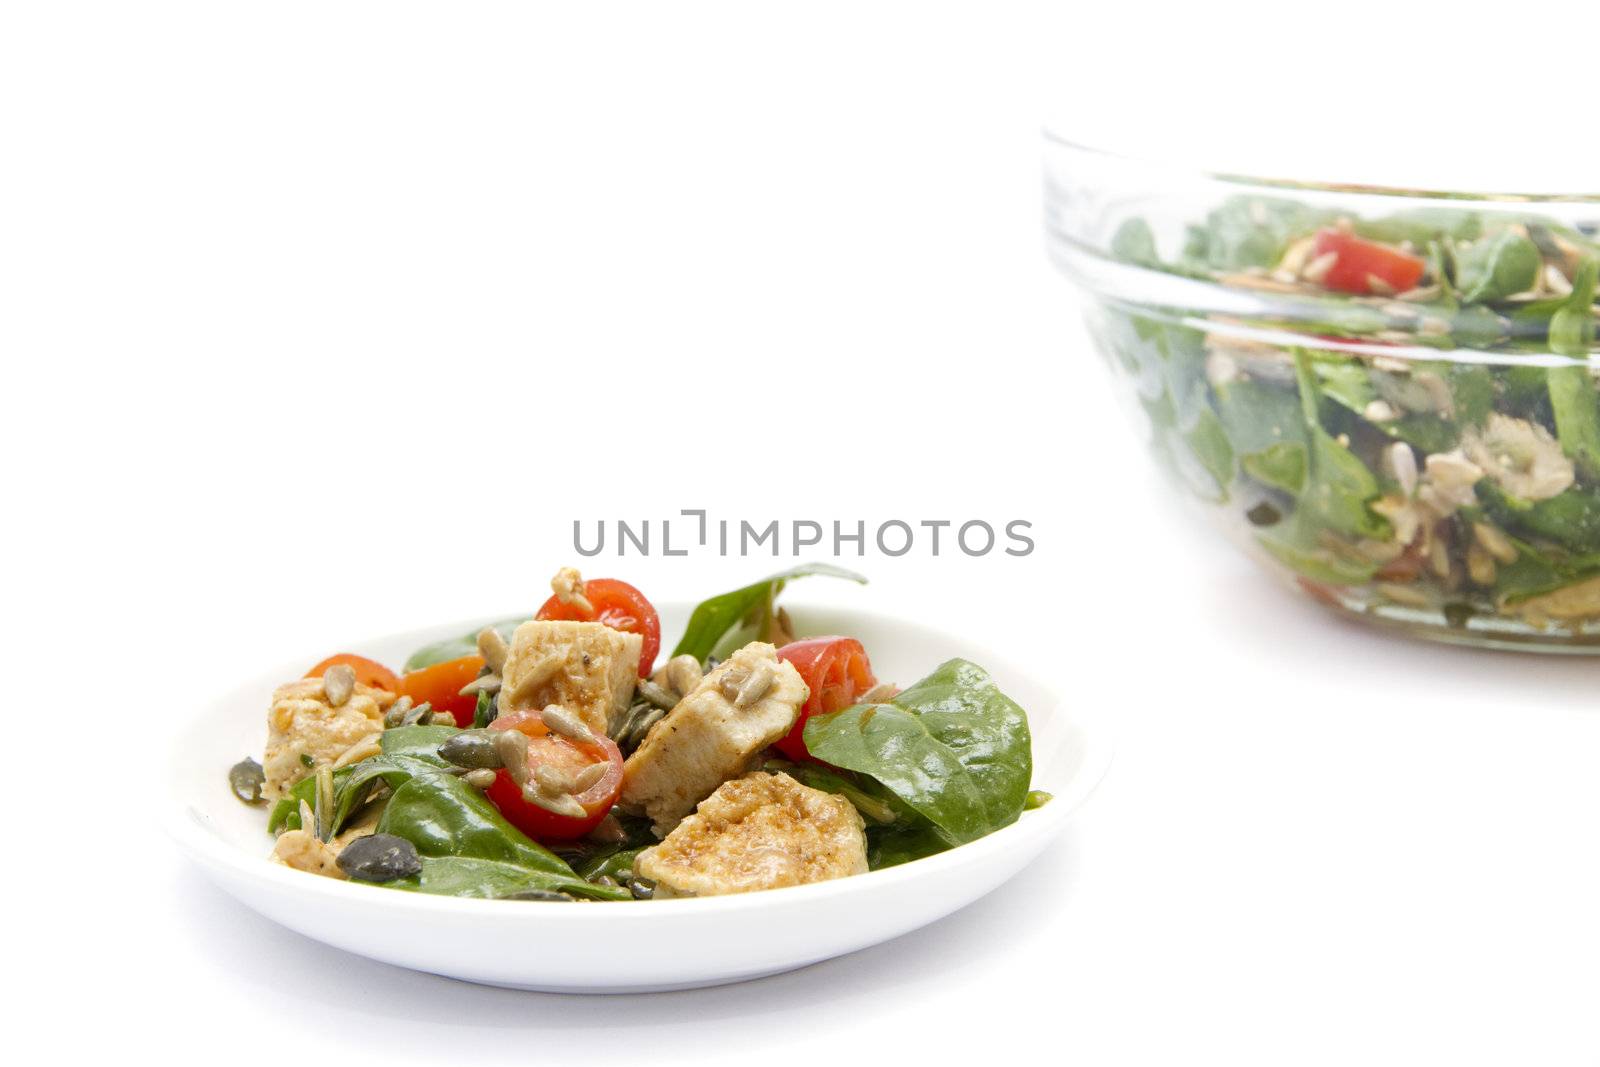 Spinach and Chicken Salad by caldix